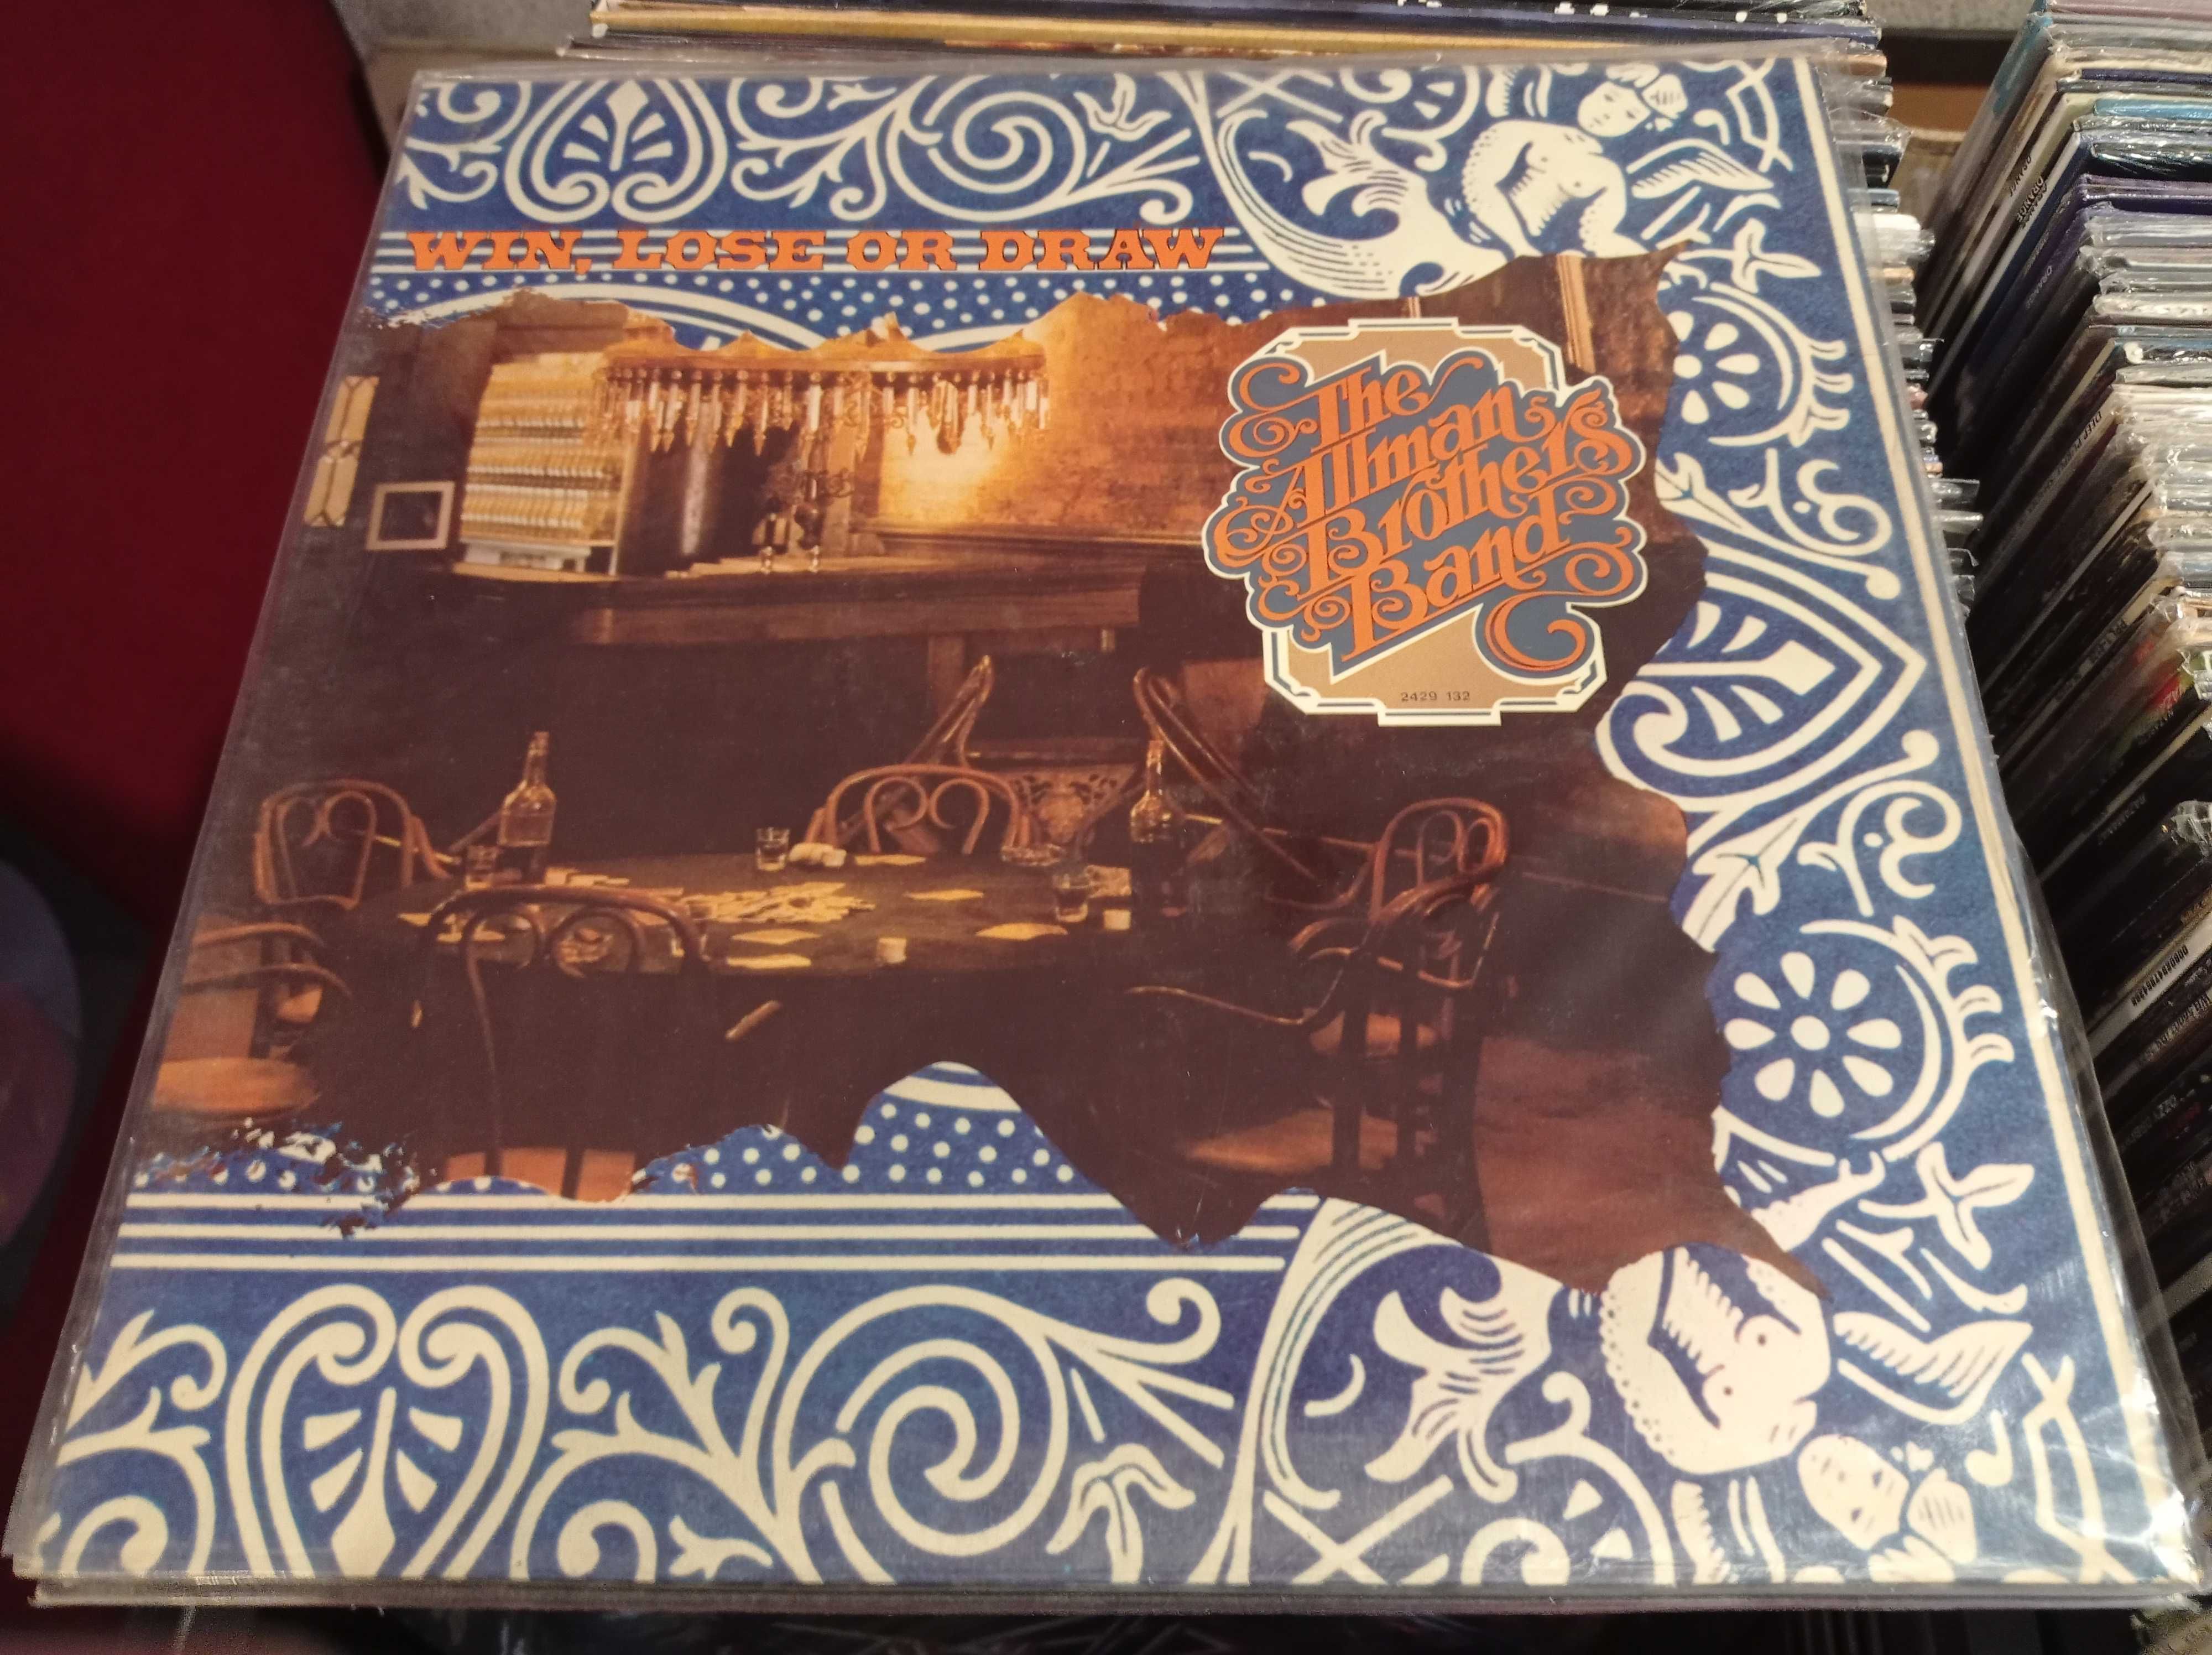 The Allman Brothers Band - Win, lose or draw